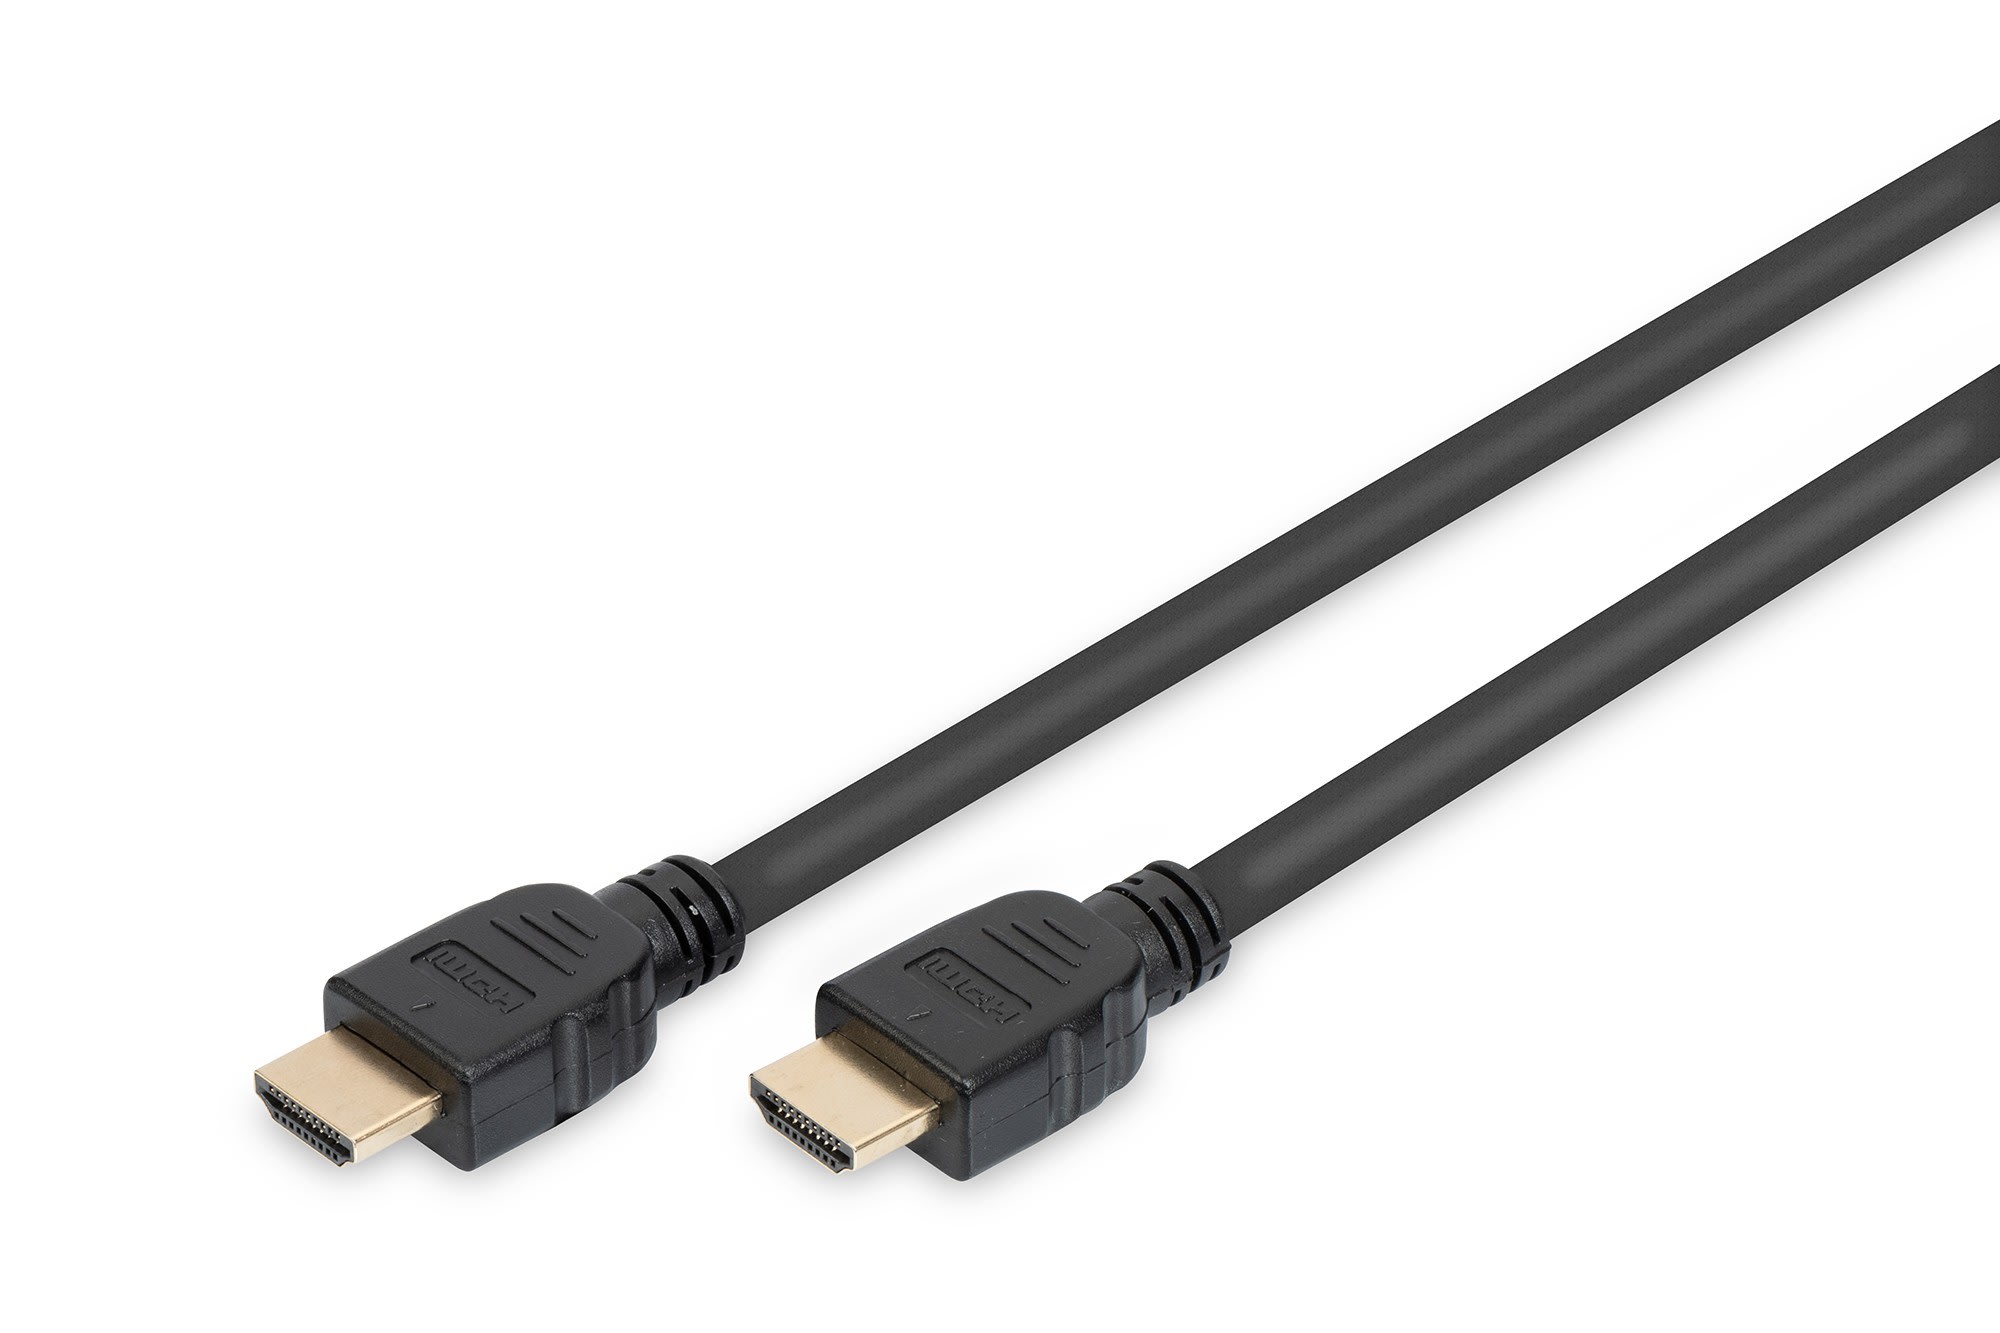 Assmann Electronic - Cable de raccordement Ultra High Speed HDMI, type A St-St, 5,0 m, mit Ethernet,